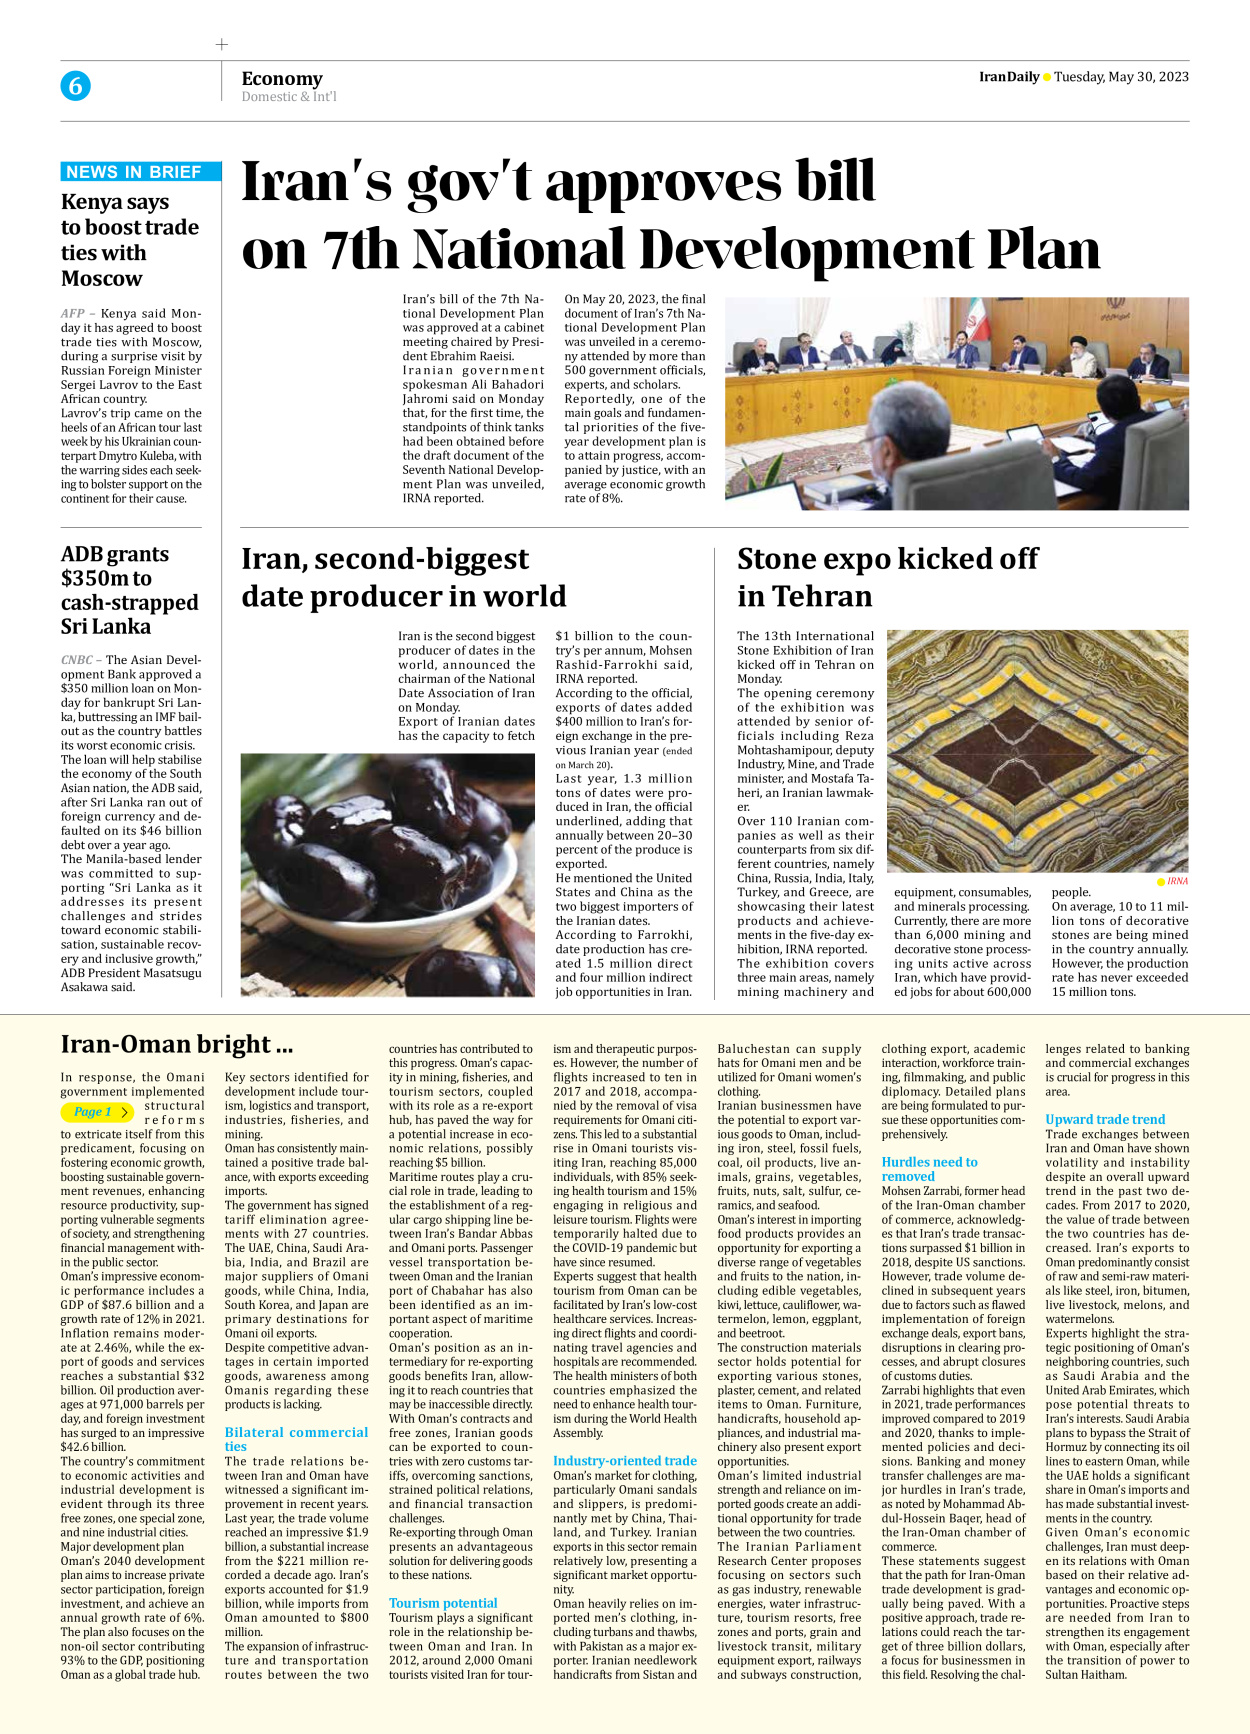 Iran Daily - Number Seven Thousand Three Hundred and Four - 30 May 2023 - Page 6